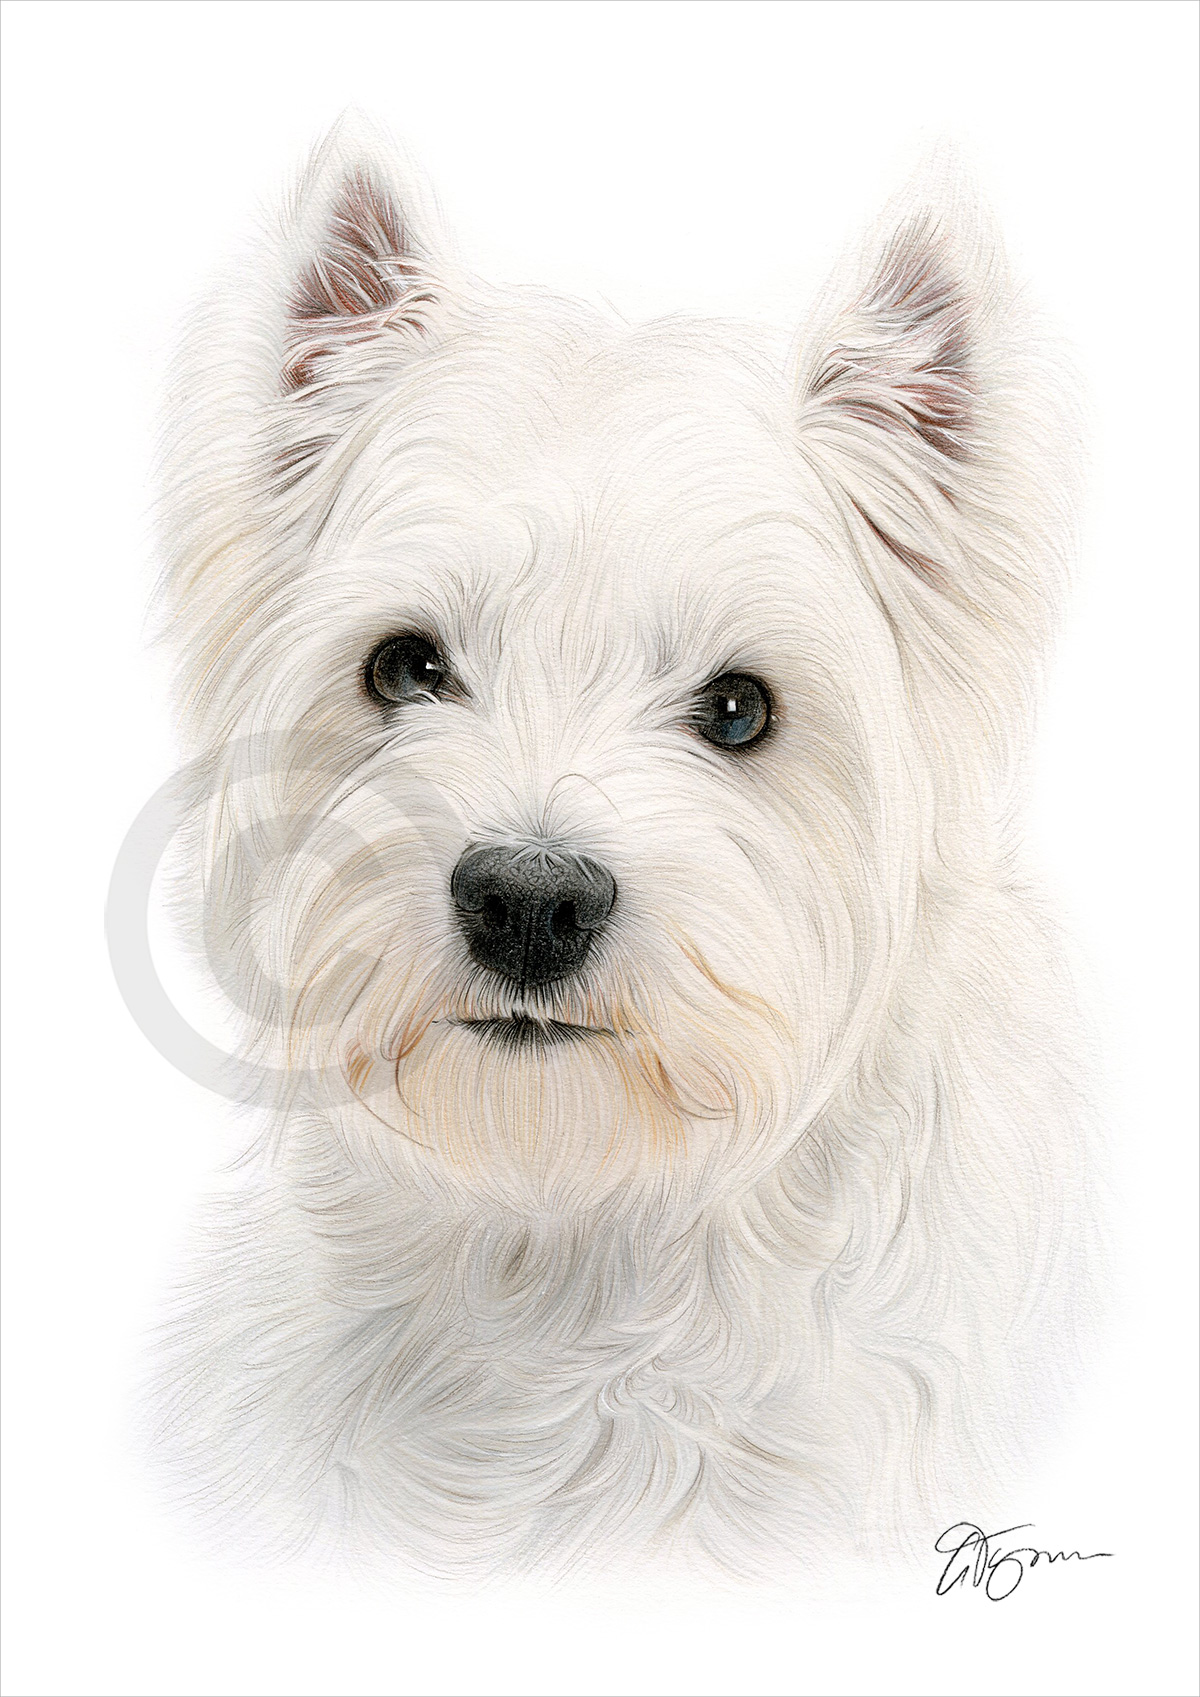 Colour pencil drawing of a west highland white terrier by artist Gary Tymon